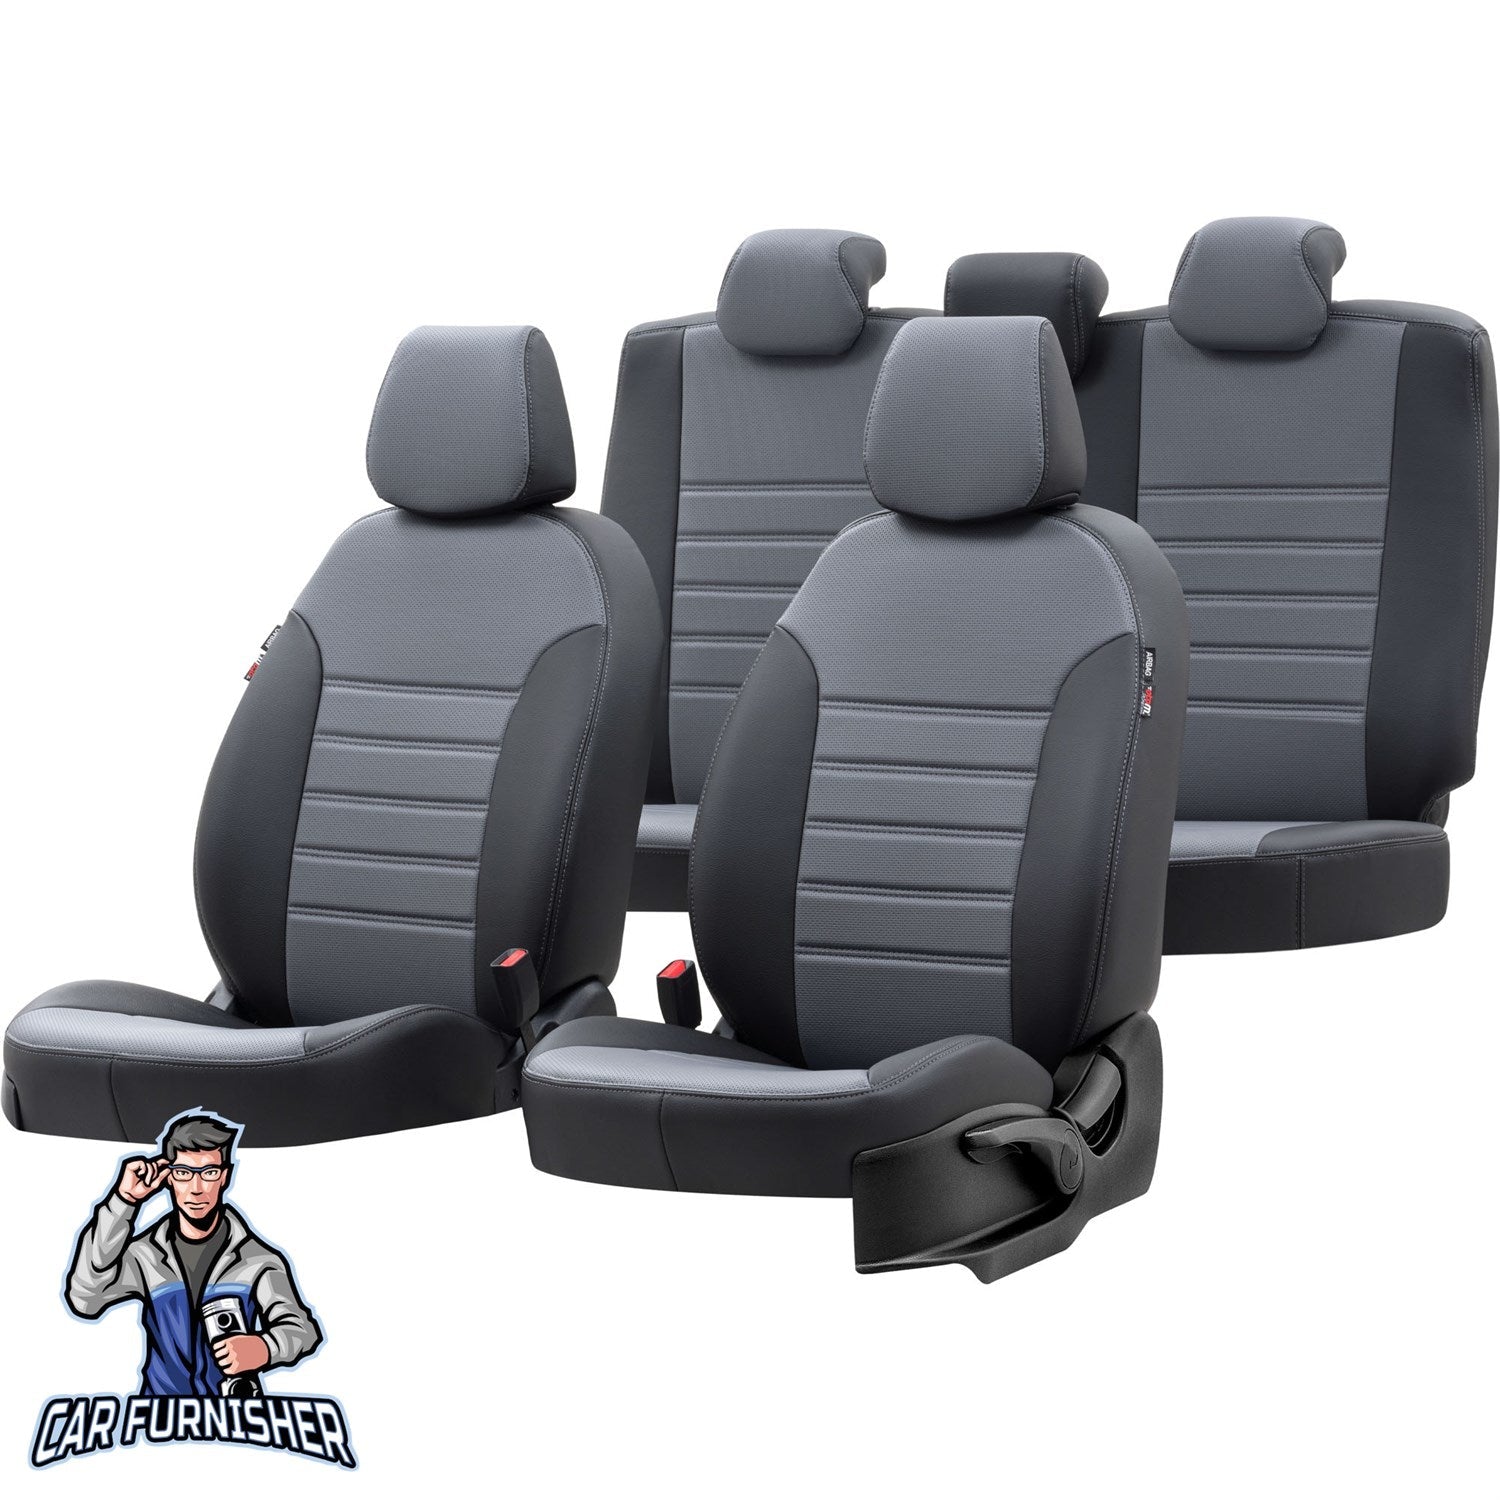 Peugeot 107 Car Seat Covers 2006-2013 New York Design Smoked Black Full Set (5 Seats + Handrest) Leather & Fabric